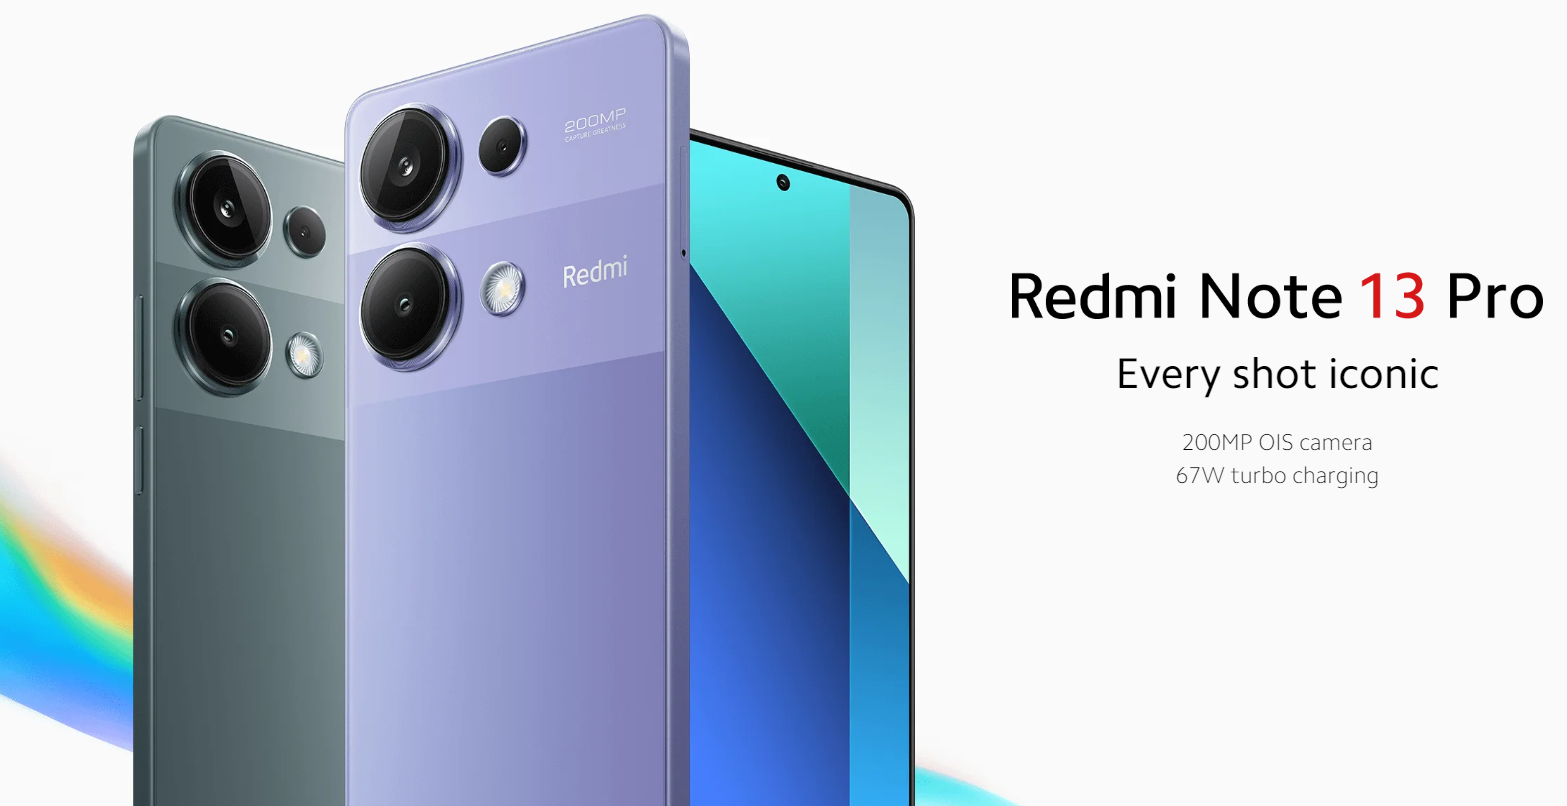 Deal Alert: Redmi Note 13 Pro 4G Currently Available at a Discounted Price!